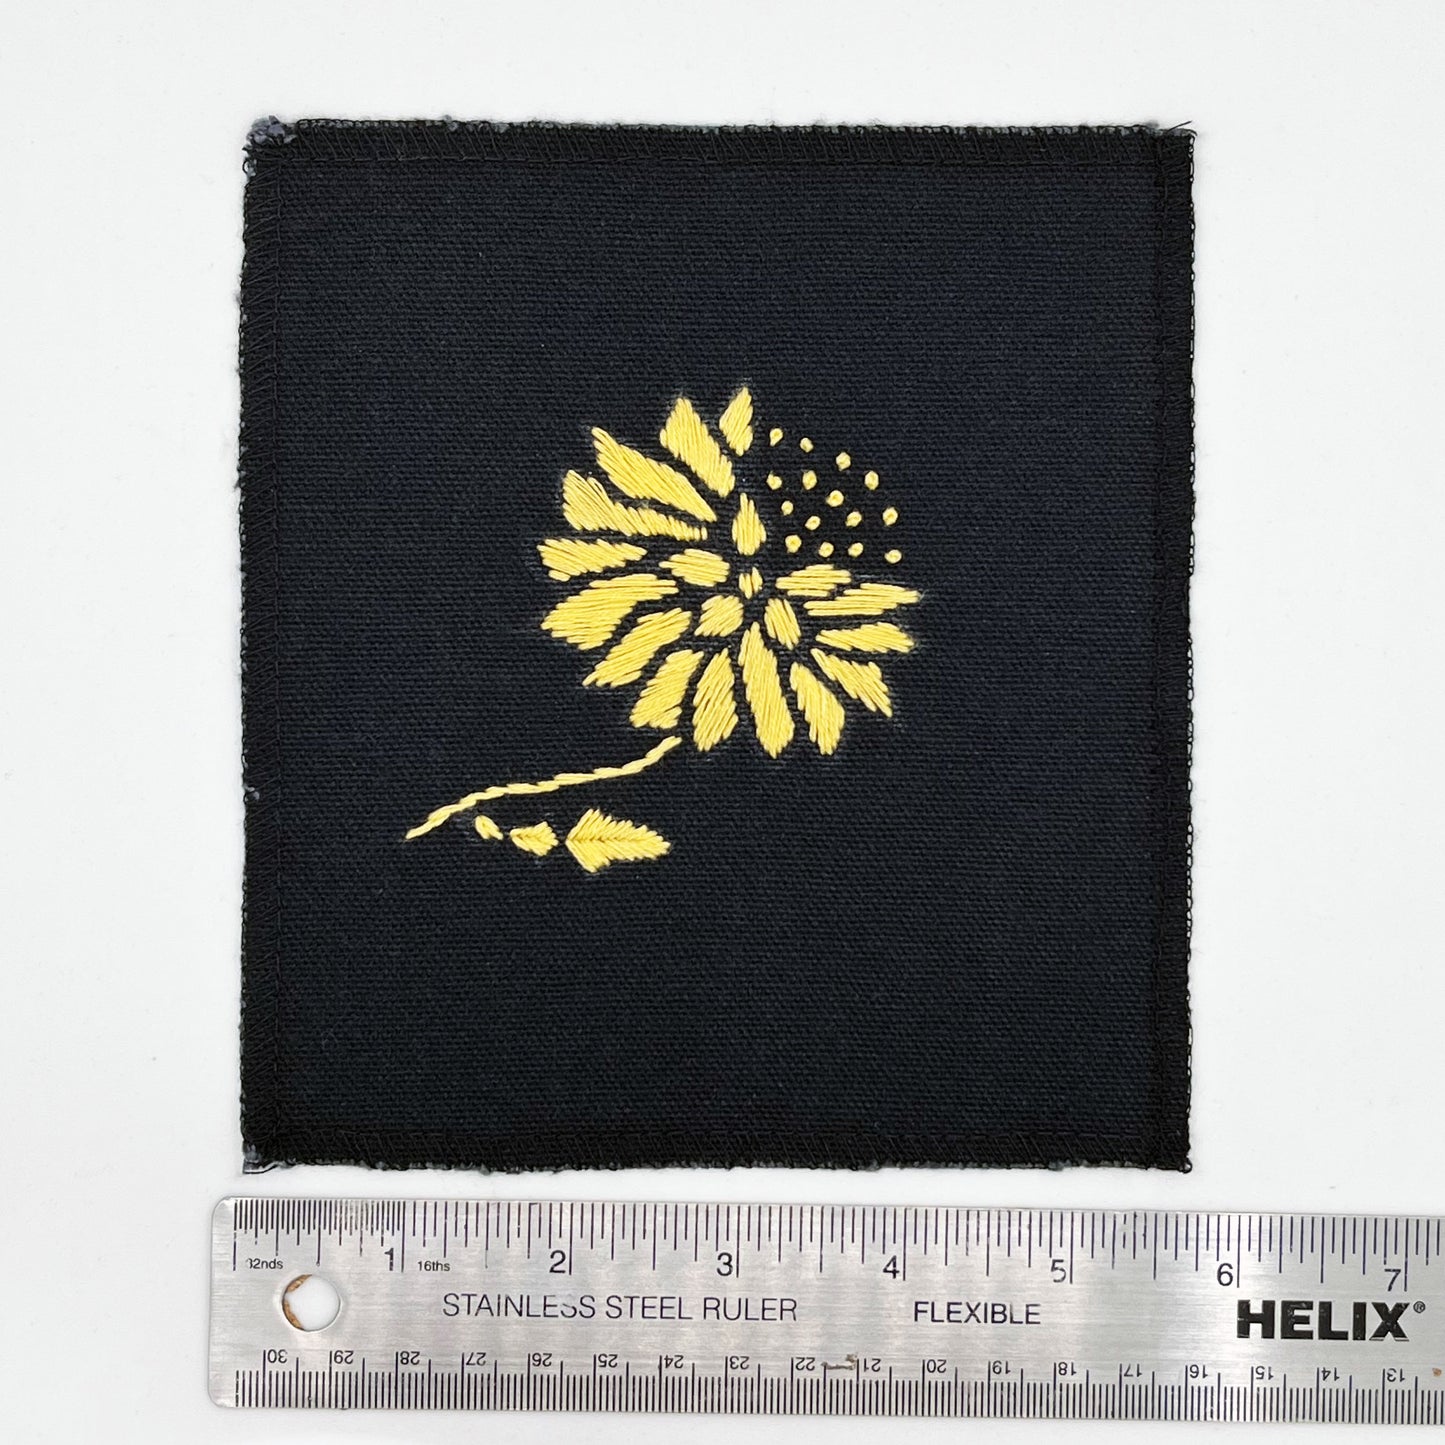 a square patch in black fabric, hand embroidered with a yellow gold colored abstract dandelion made mostly of petals, with a quarter of them replaced with french knots, with overlocked edges, next to a metal ruler to show a width of six inches